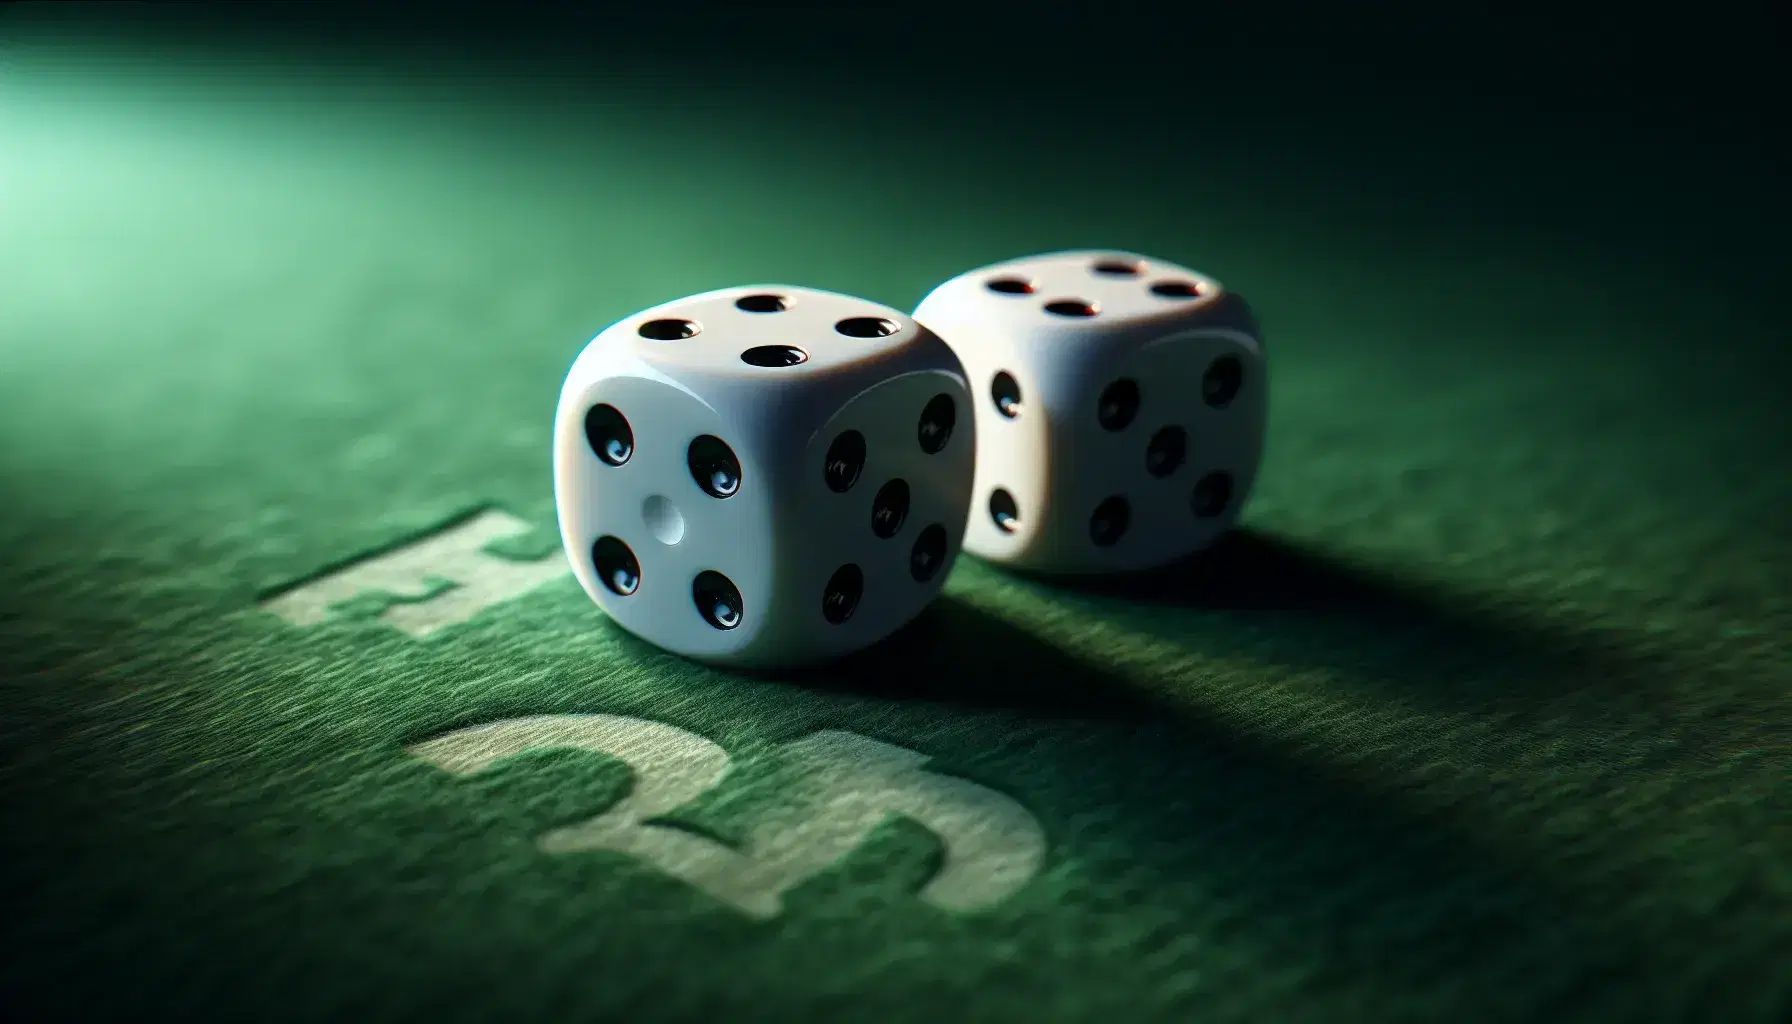 Two dice on green felt, one showing three pips diagonally, the other with four pips in a square pattern, casting a shadow from light above left.